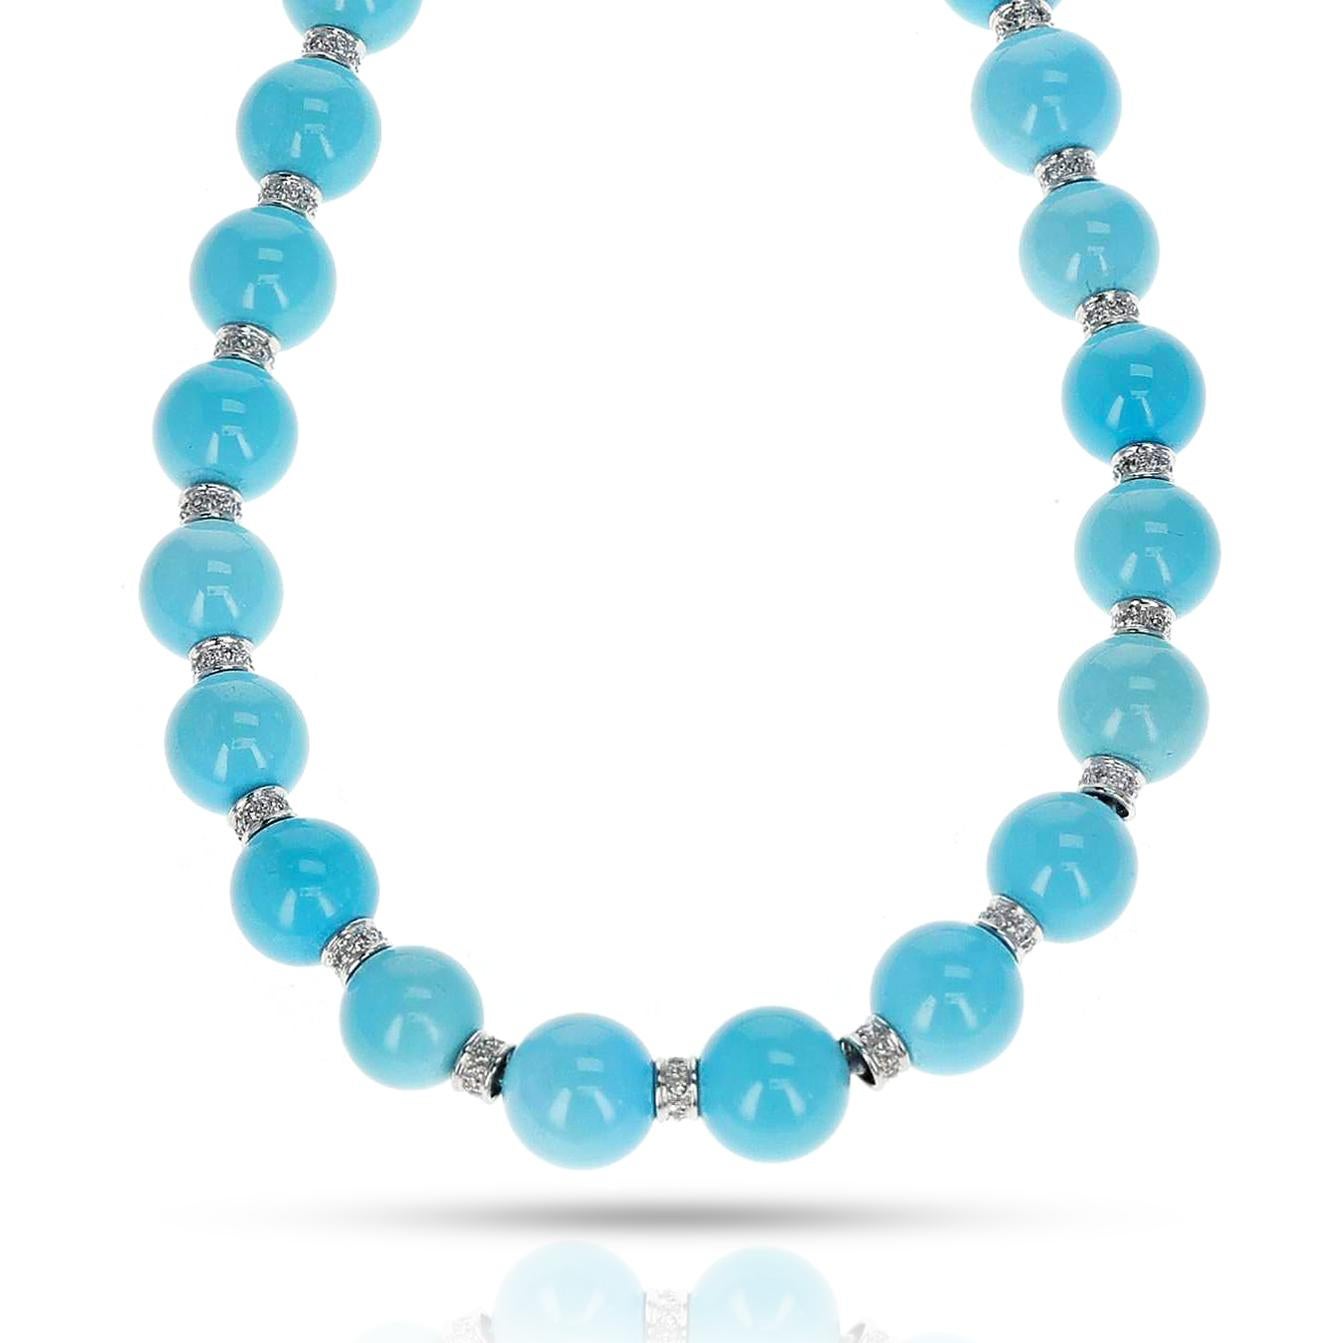 A necklace of 13.40-13.50 MM Turquoise Round Beads with Diamond Discs made in 18 Karat White Gold. The length is 17.75 inches. The total weight is 103.90 grams. 
